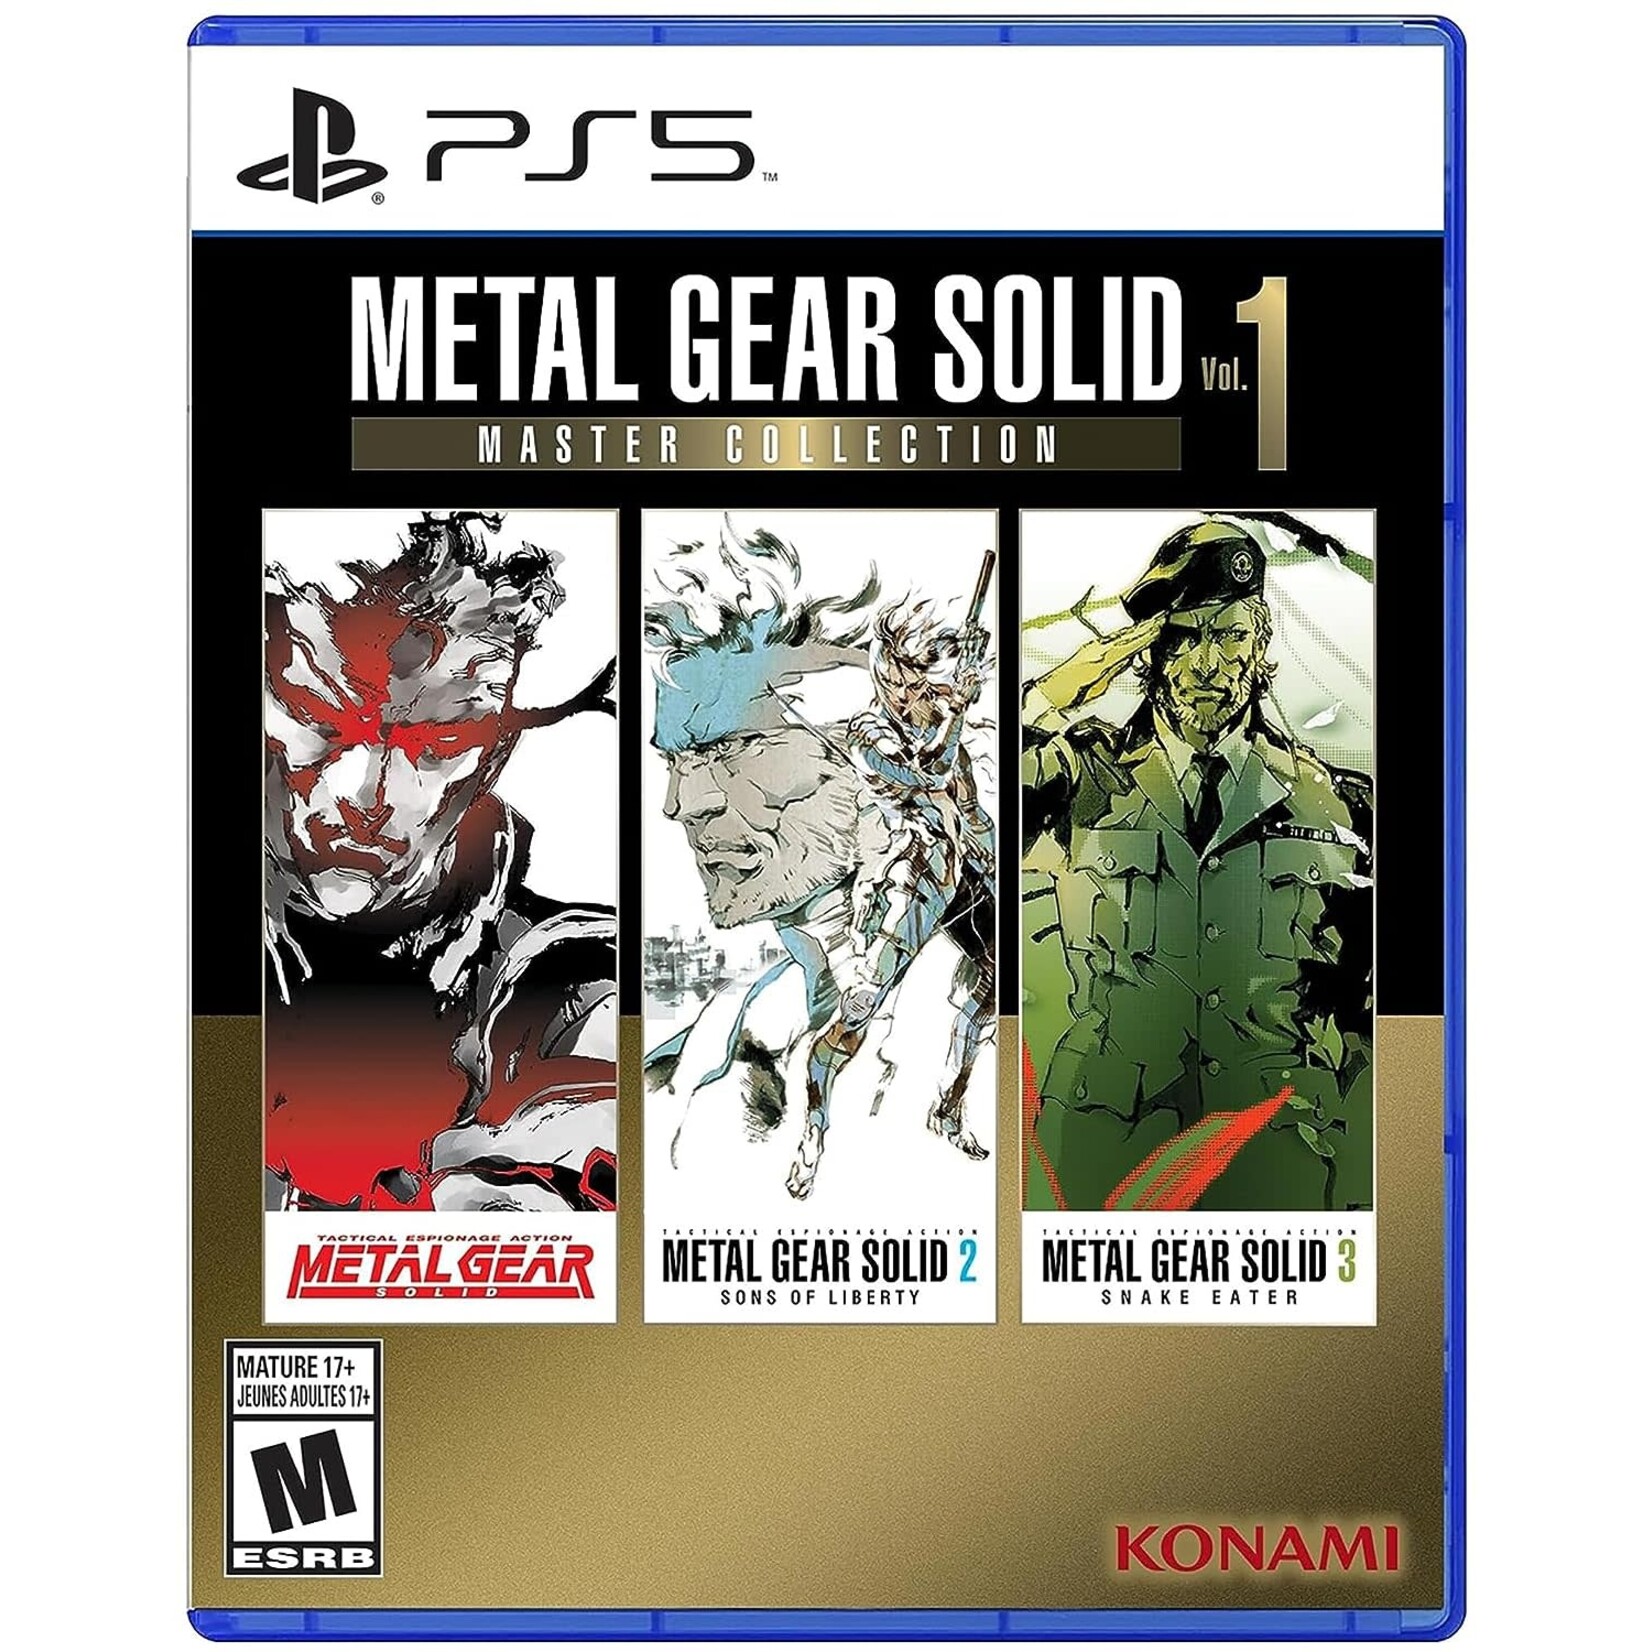 PS5-Metal Gear Solid: Master Collection Vol. 1